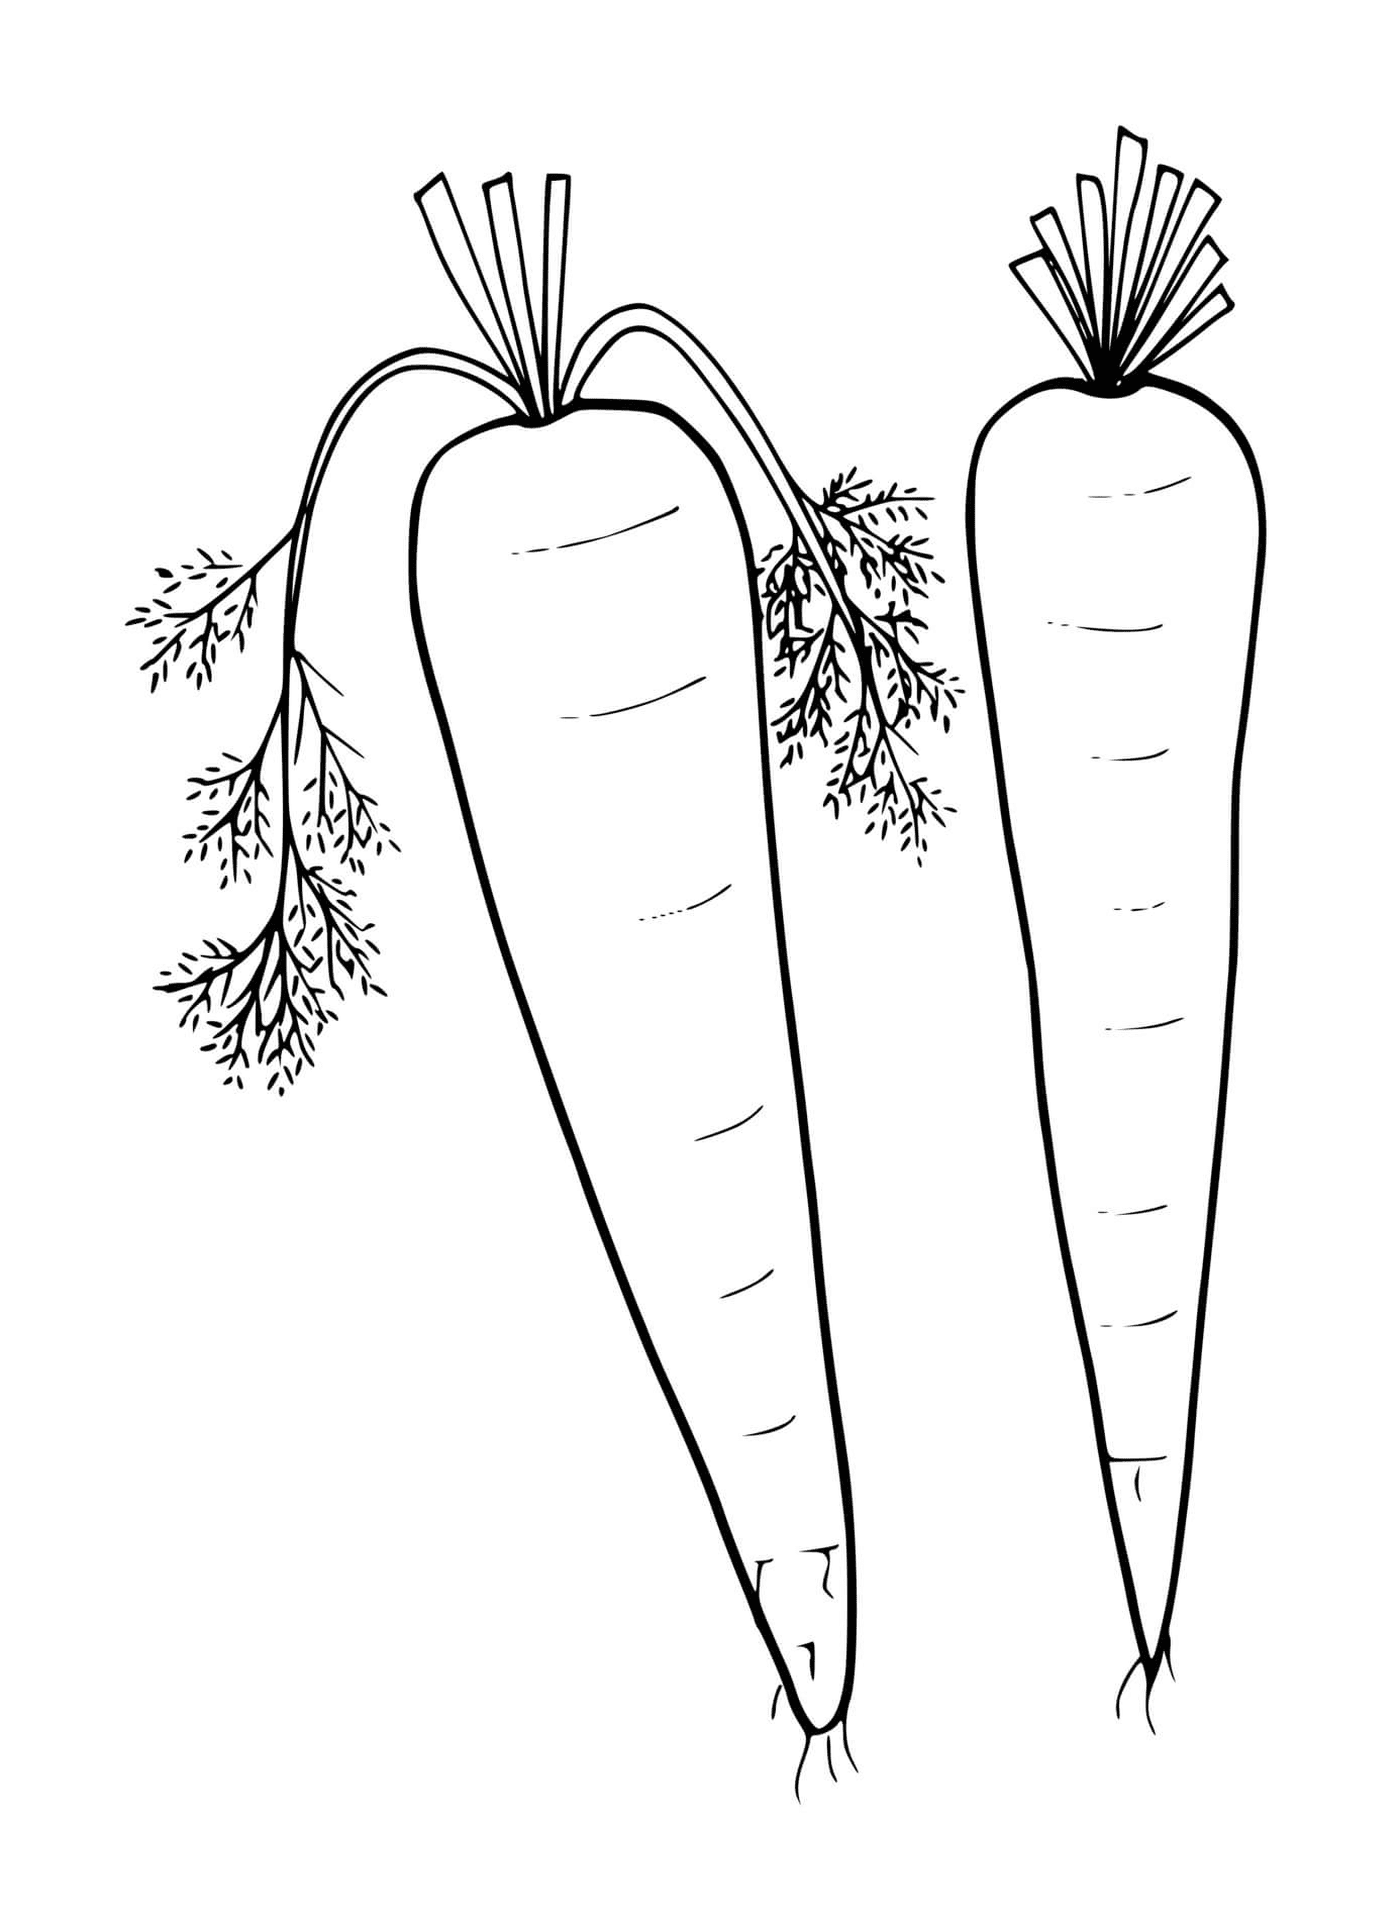  Fresh carrot, two carrots on a white background 